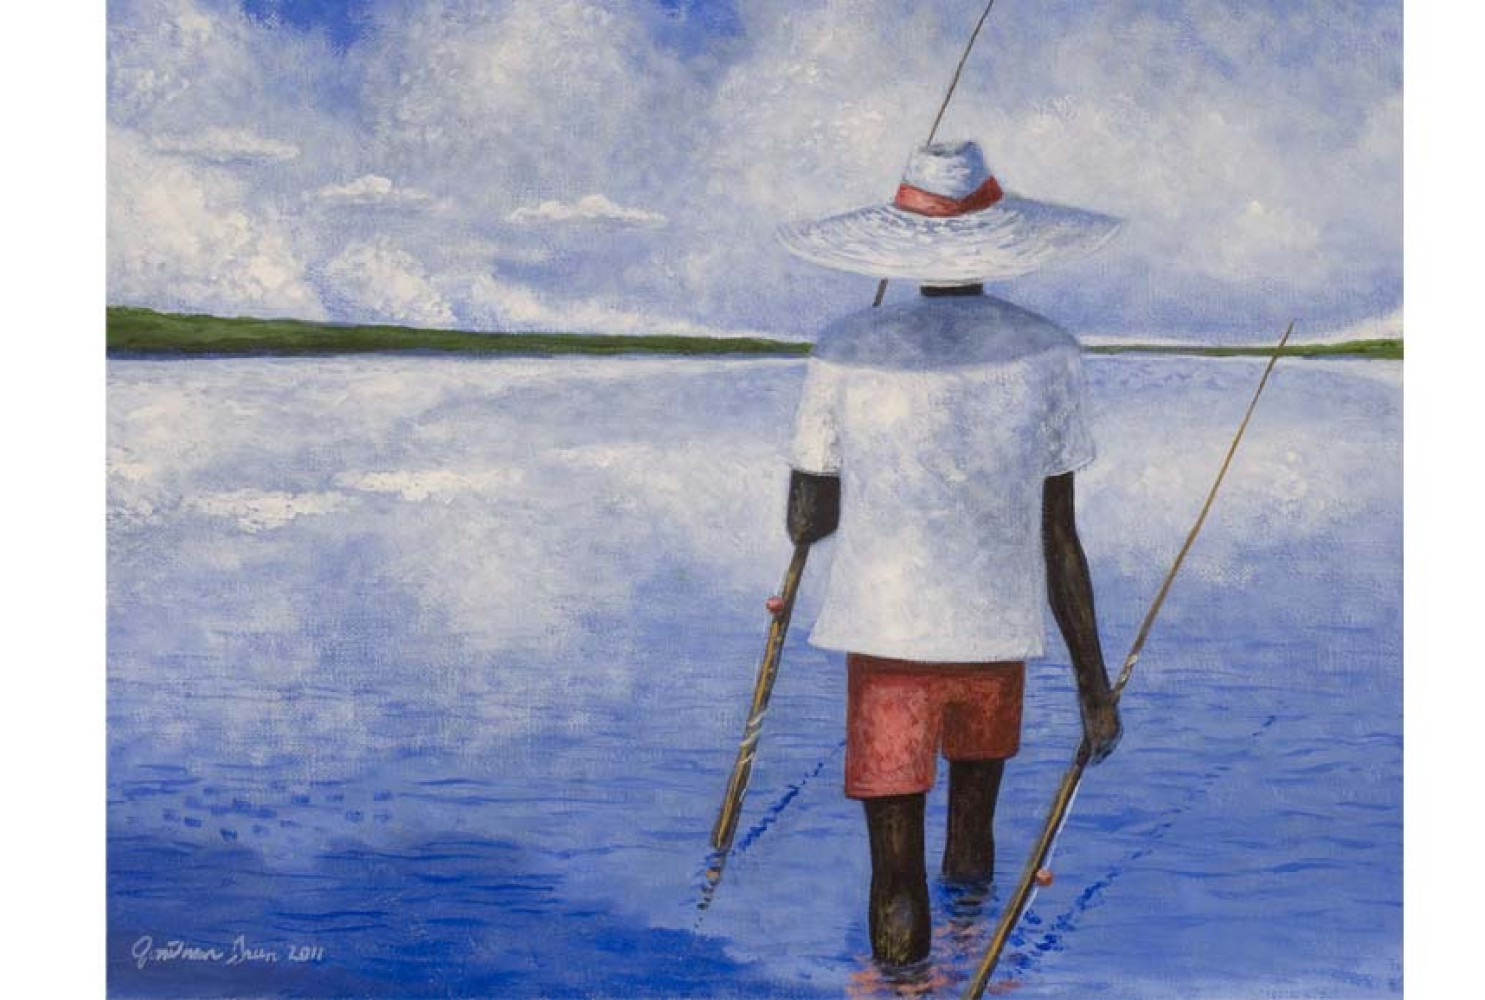 Fishing Spot, 2011, by Jonathan Green (American b. 1955); Oil on canvas; 11 x 14 inches; Image © Jonathan Green; Courtesy of Vibrant Vision Collection of Jonathan Green and Richard Weedman